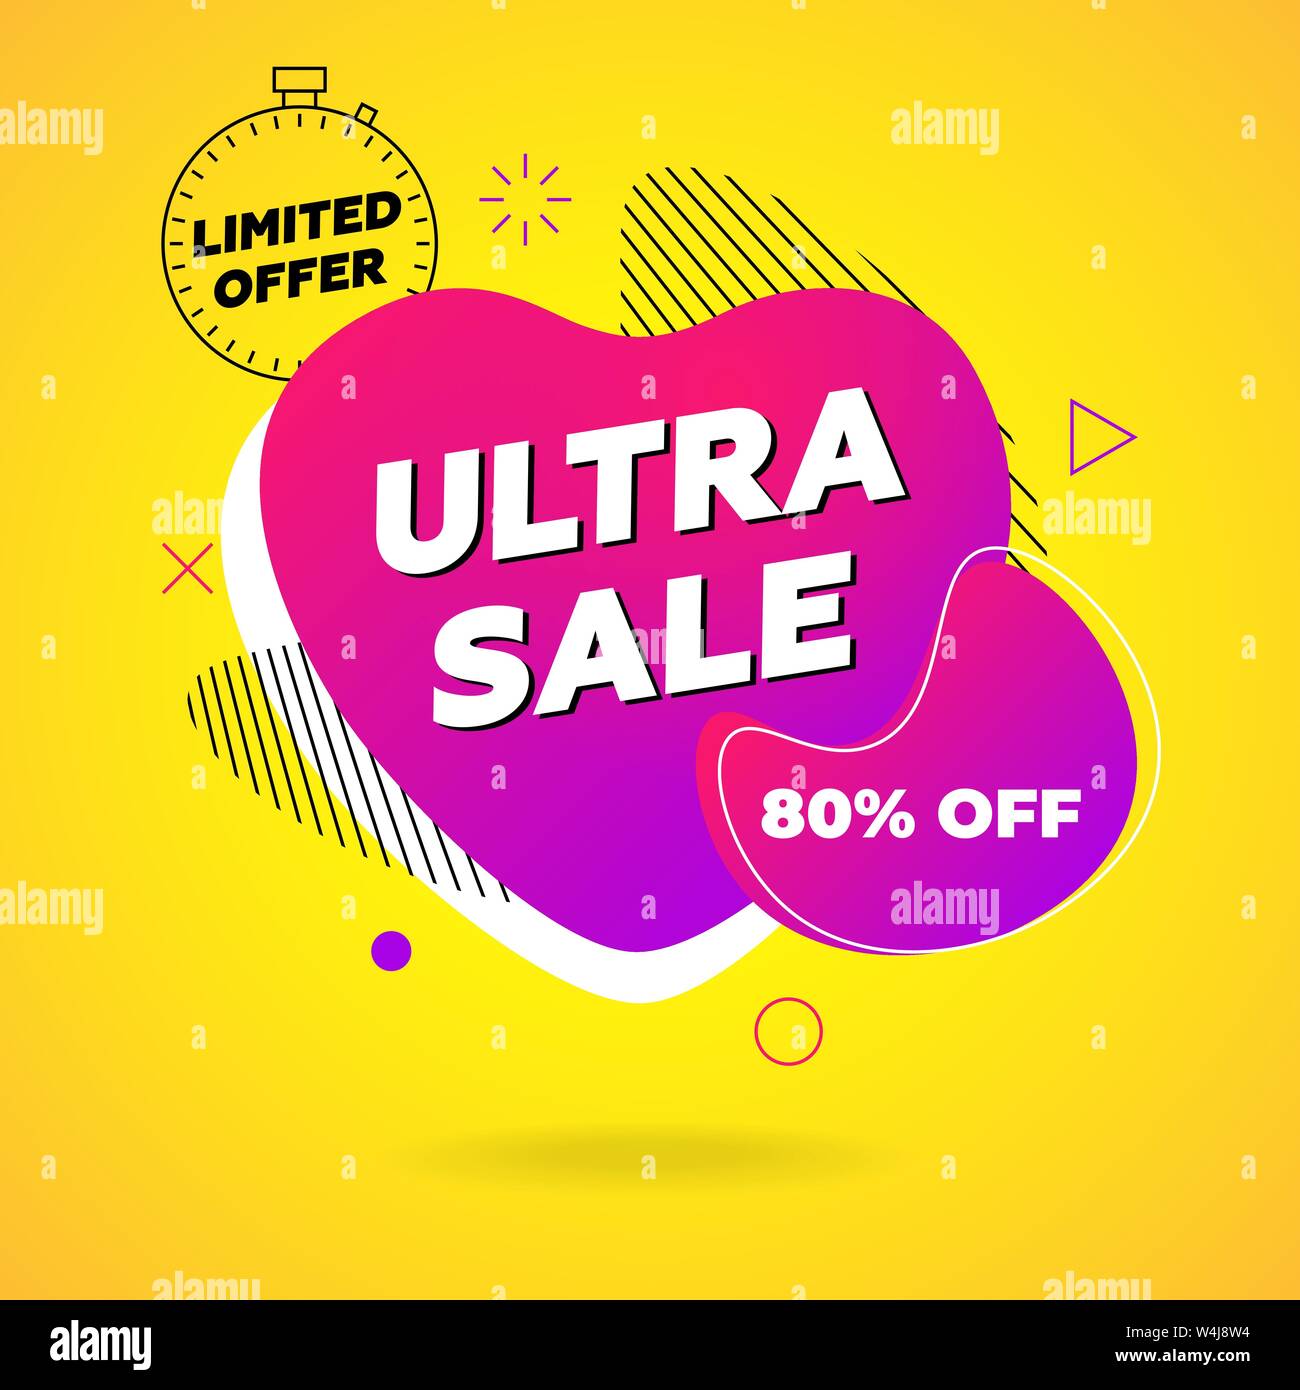 Ultra sale banner. 80 percent off template design on abstract liquid shape. Flat geometric gradient colored graphic element in heart fluid form on Stock Vector